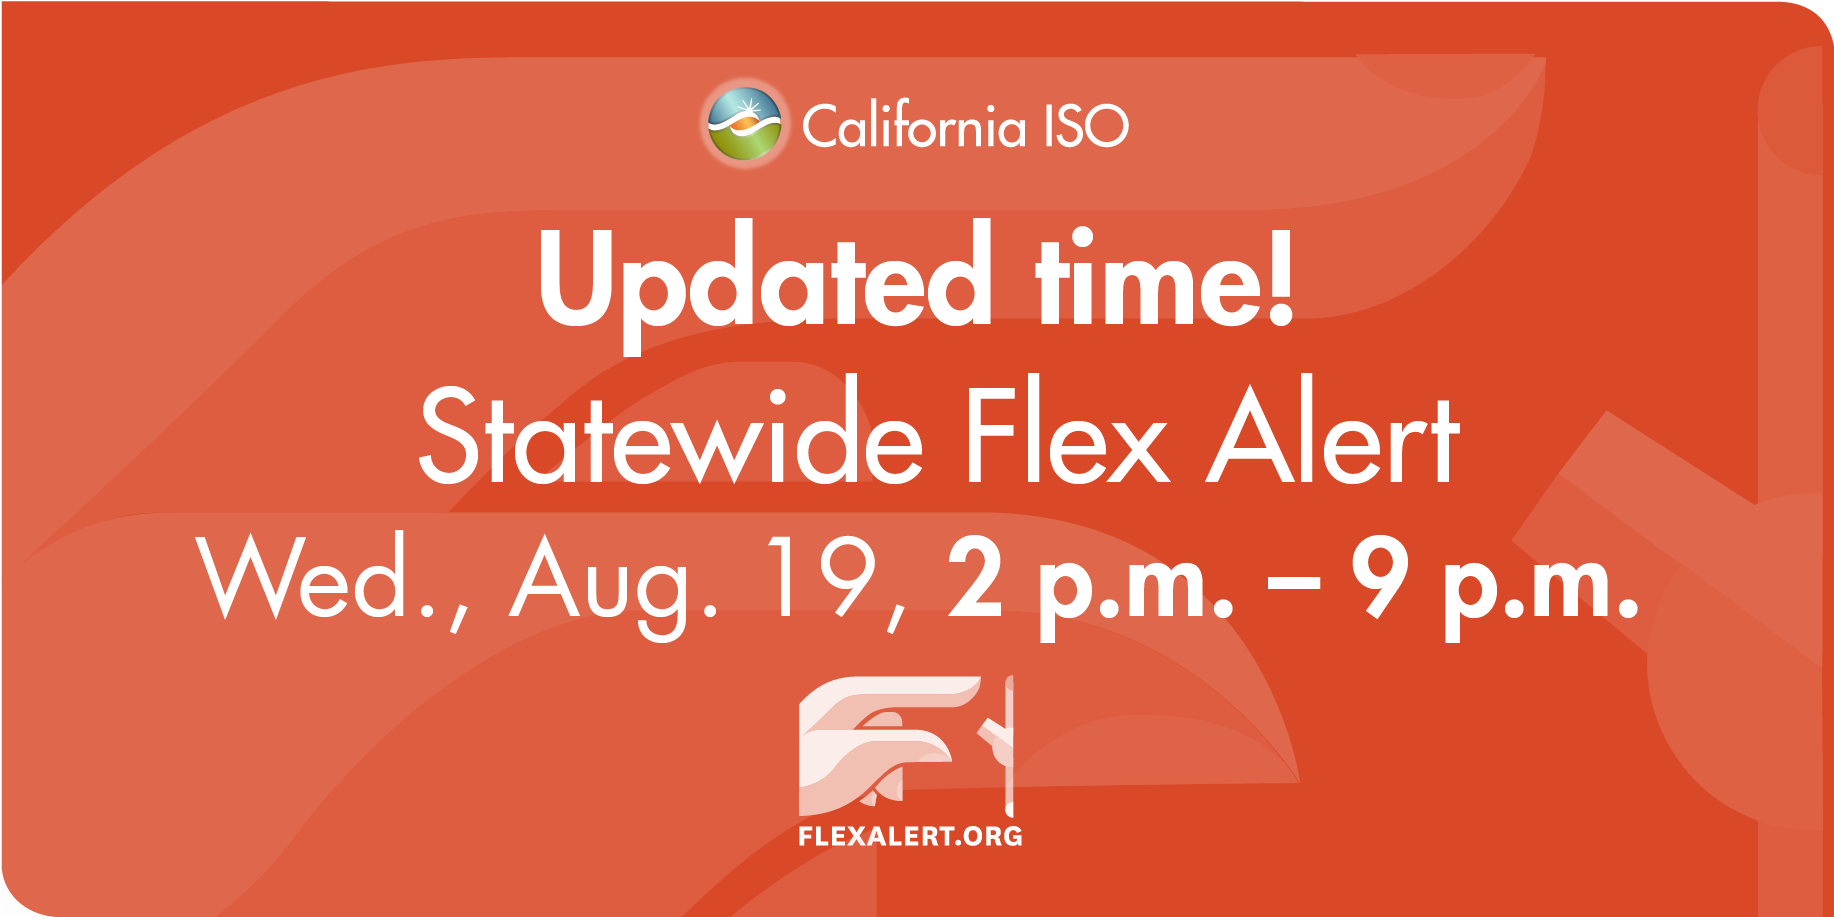 ISO News Release: Conservation Needed Earlier In Day; Flex Alert Issued For 2 to 9 p.m.